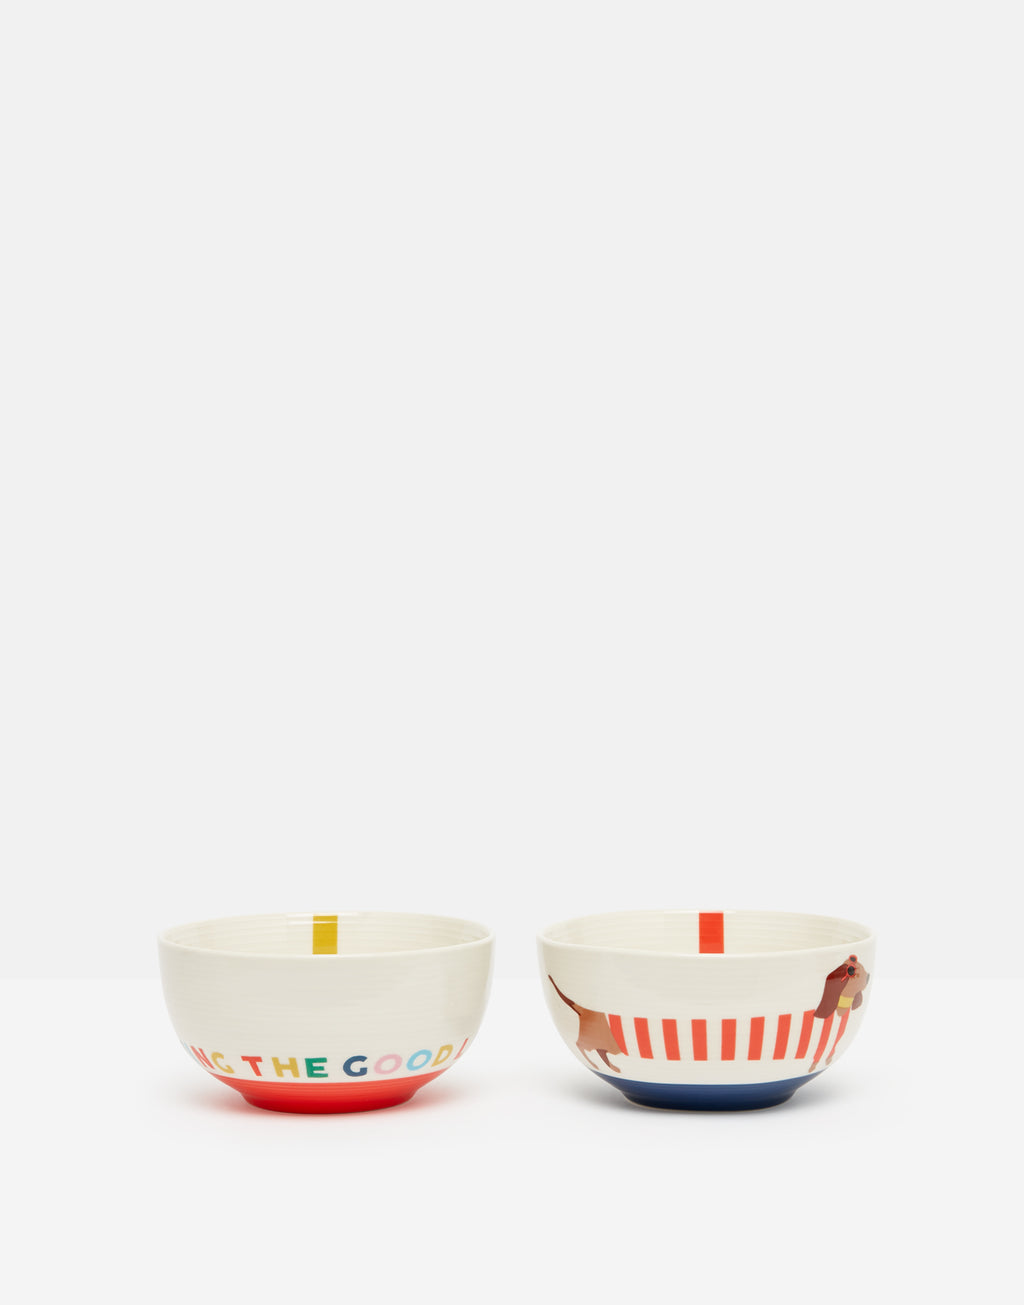 Joules Home Brightside Dachshund Cereal Bowl Set of 2